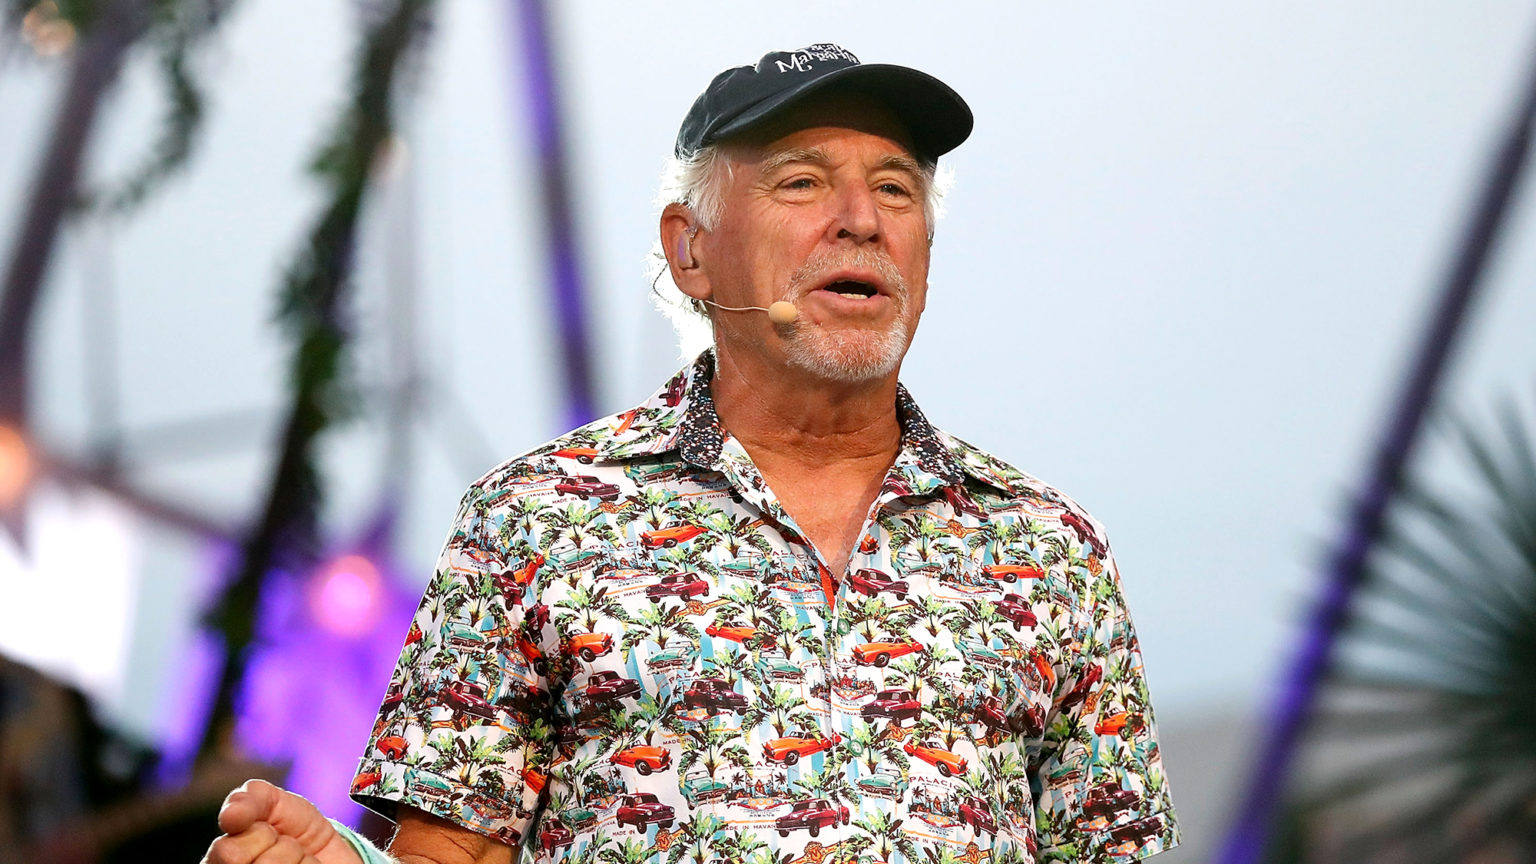 A State Of Flow: Jimmy Buffett Has Been Up For 5 Straight Days ...